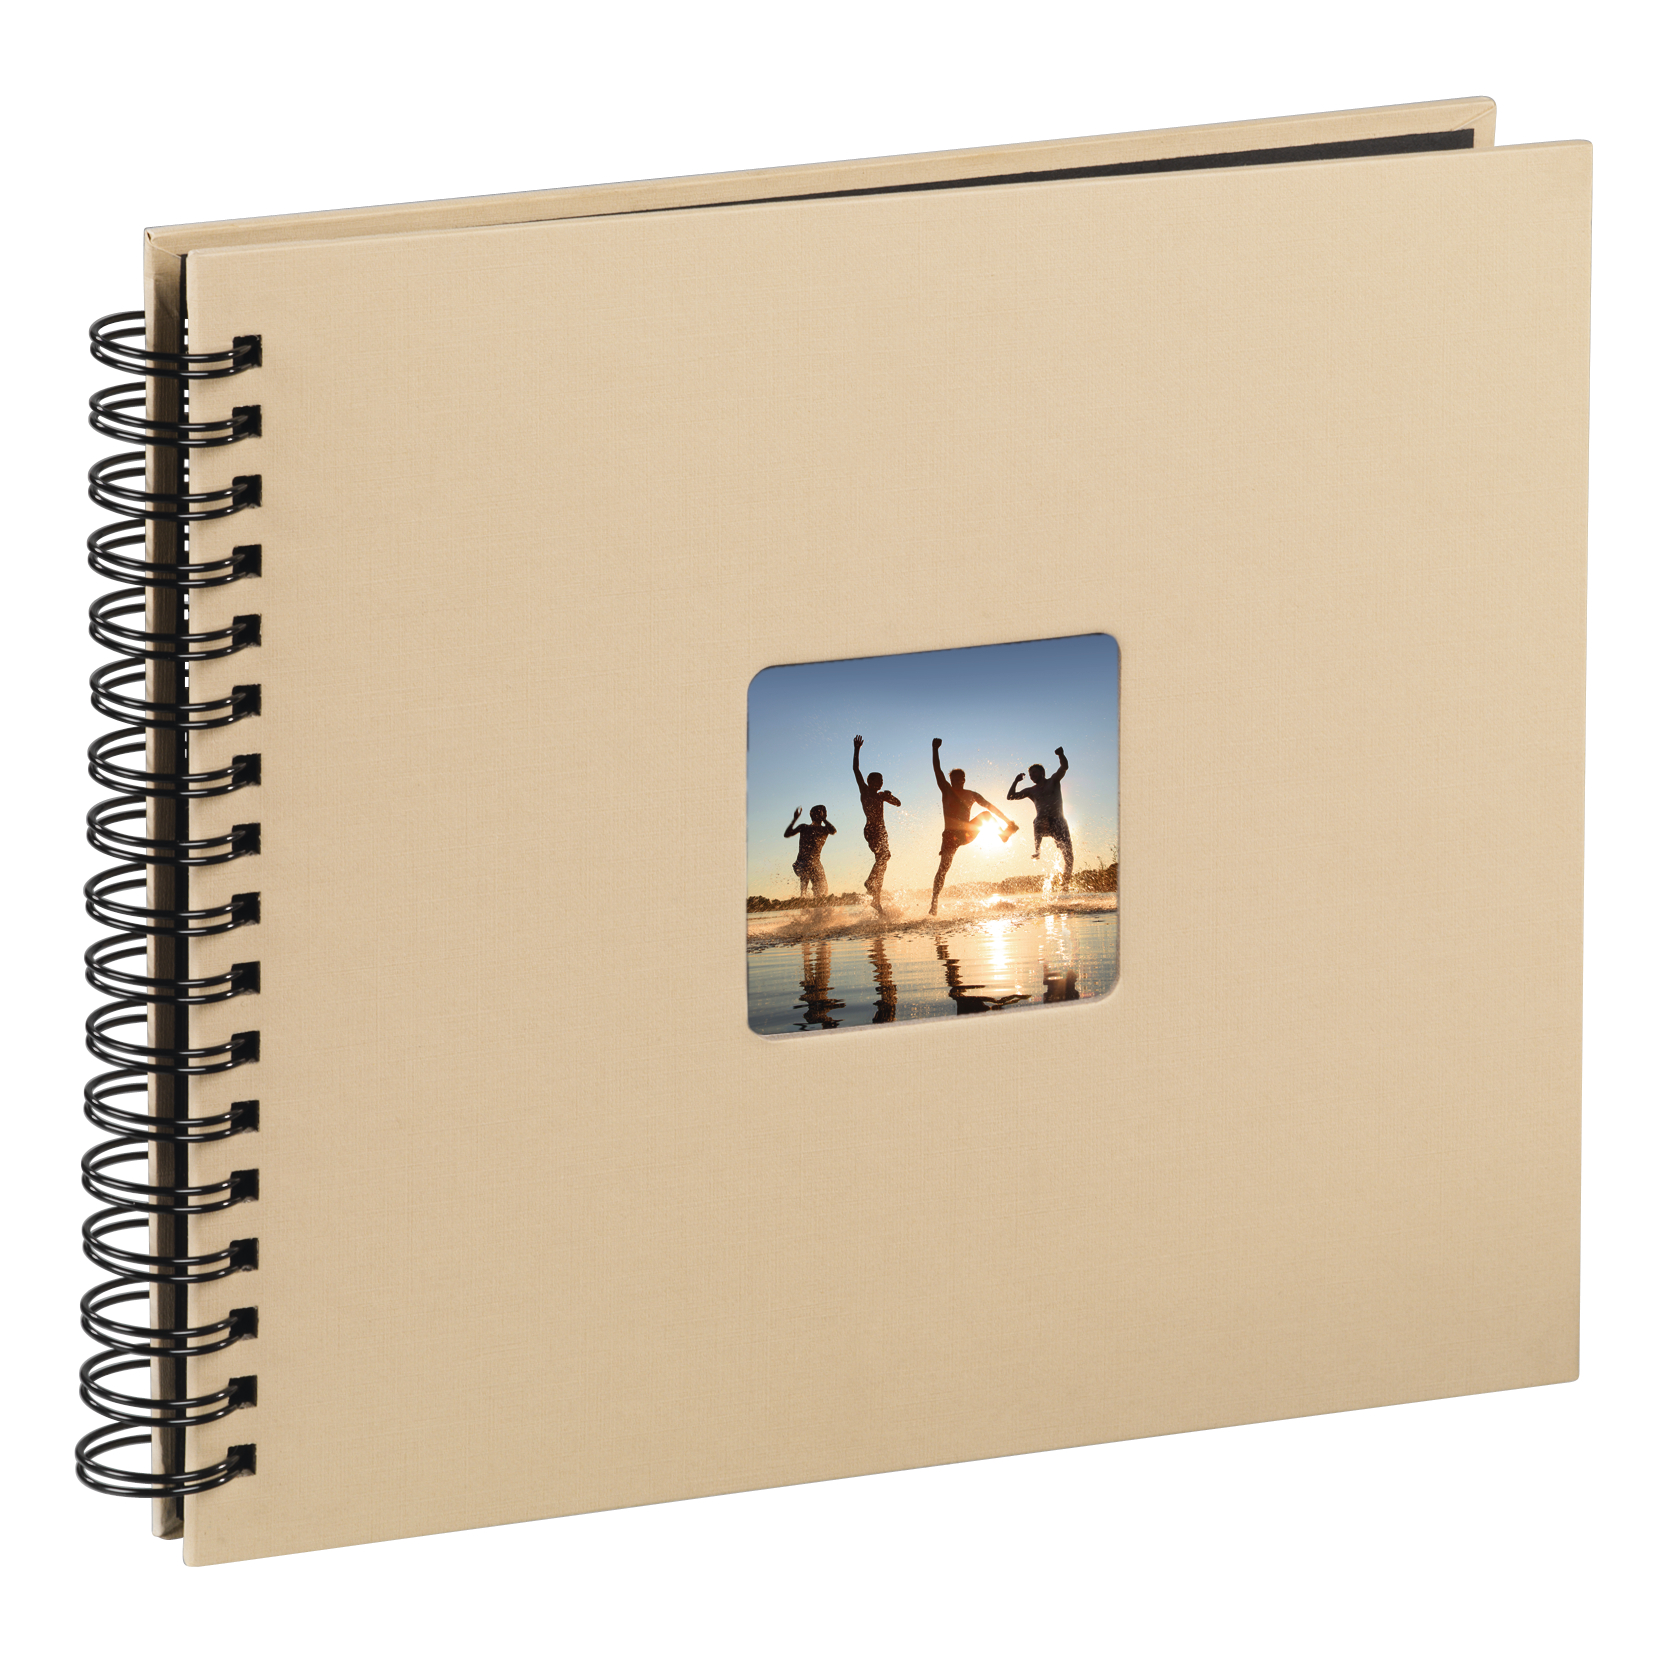 HAMA Album Fine Art 10609 360x320mm, taupe 25 pages 360x320mm, taupe 25 pages